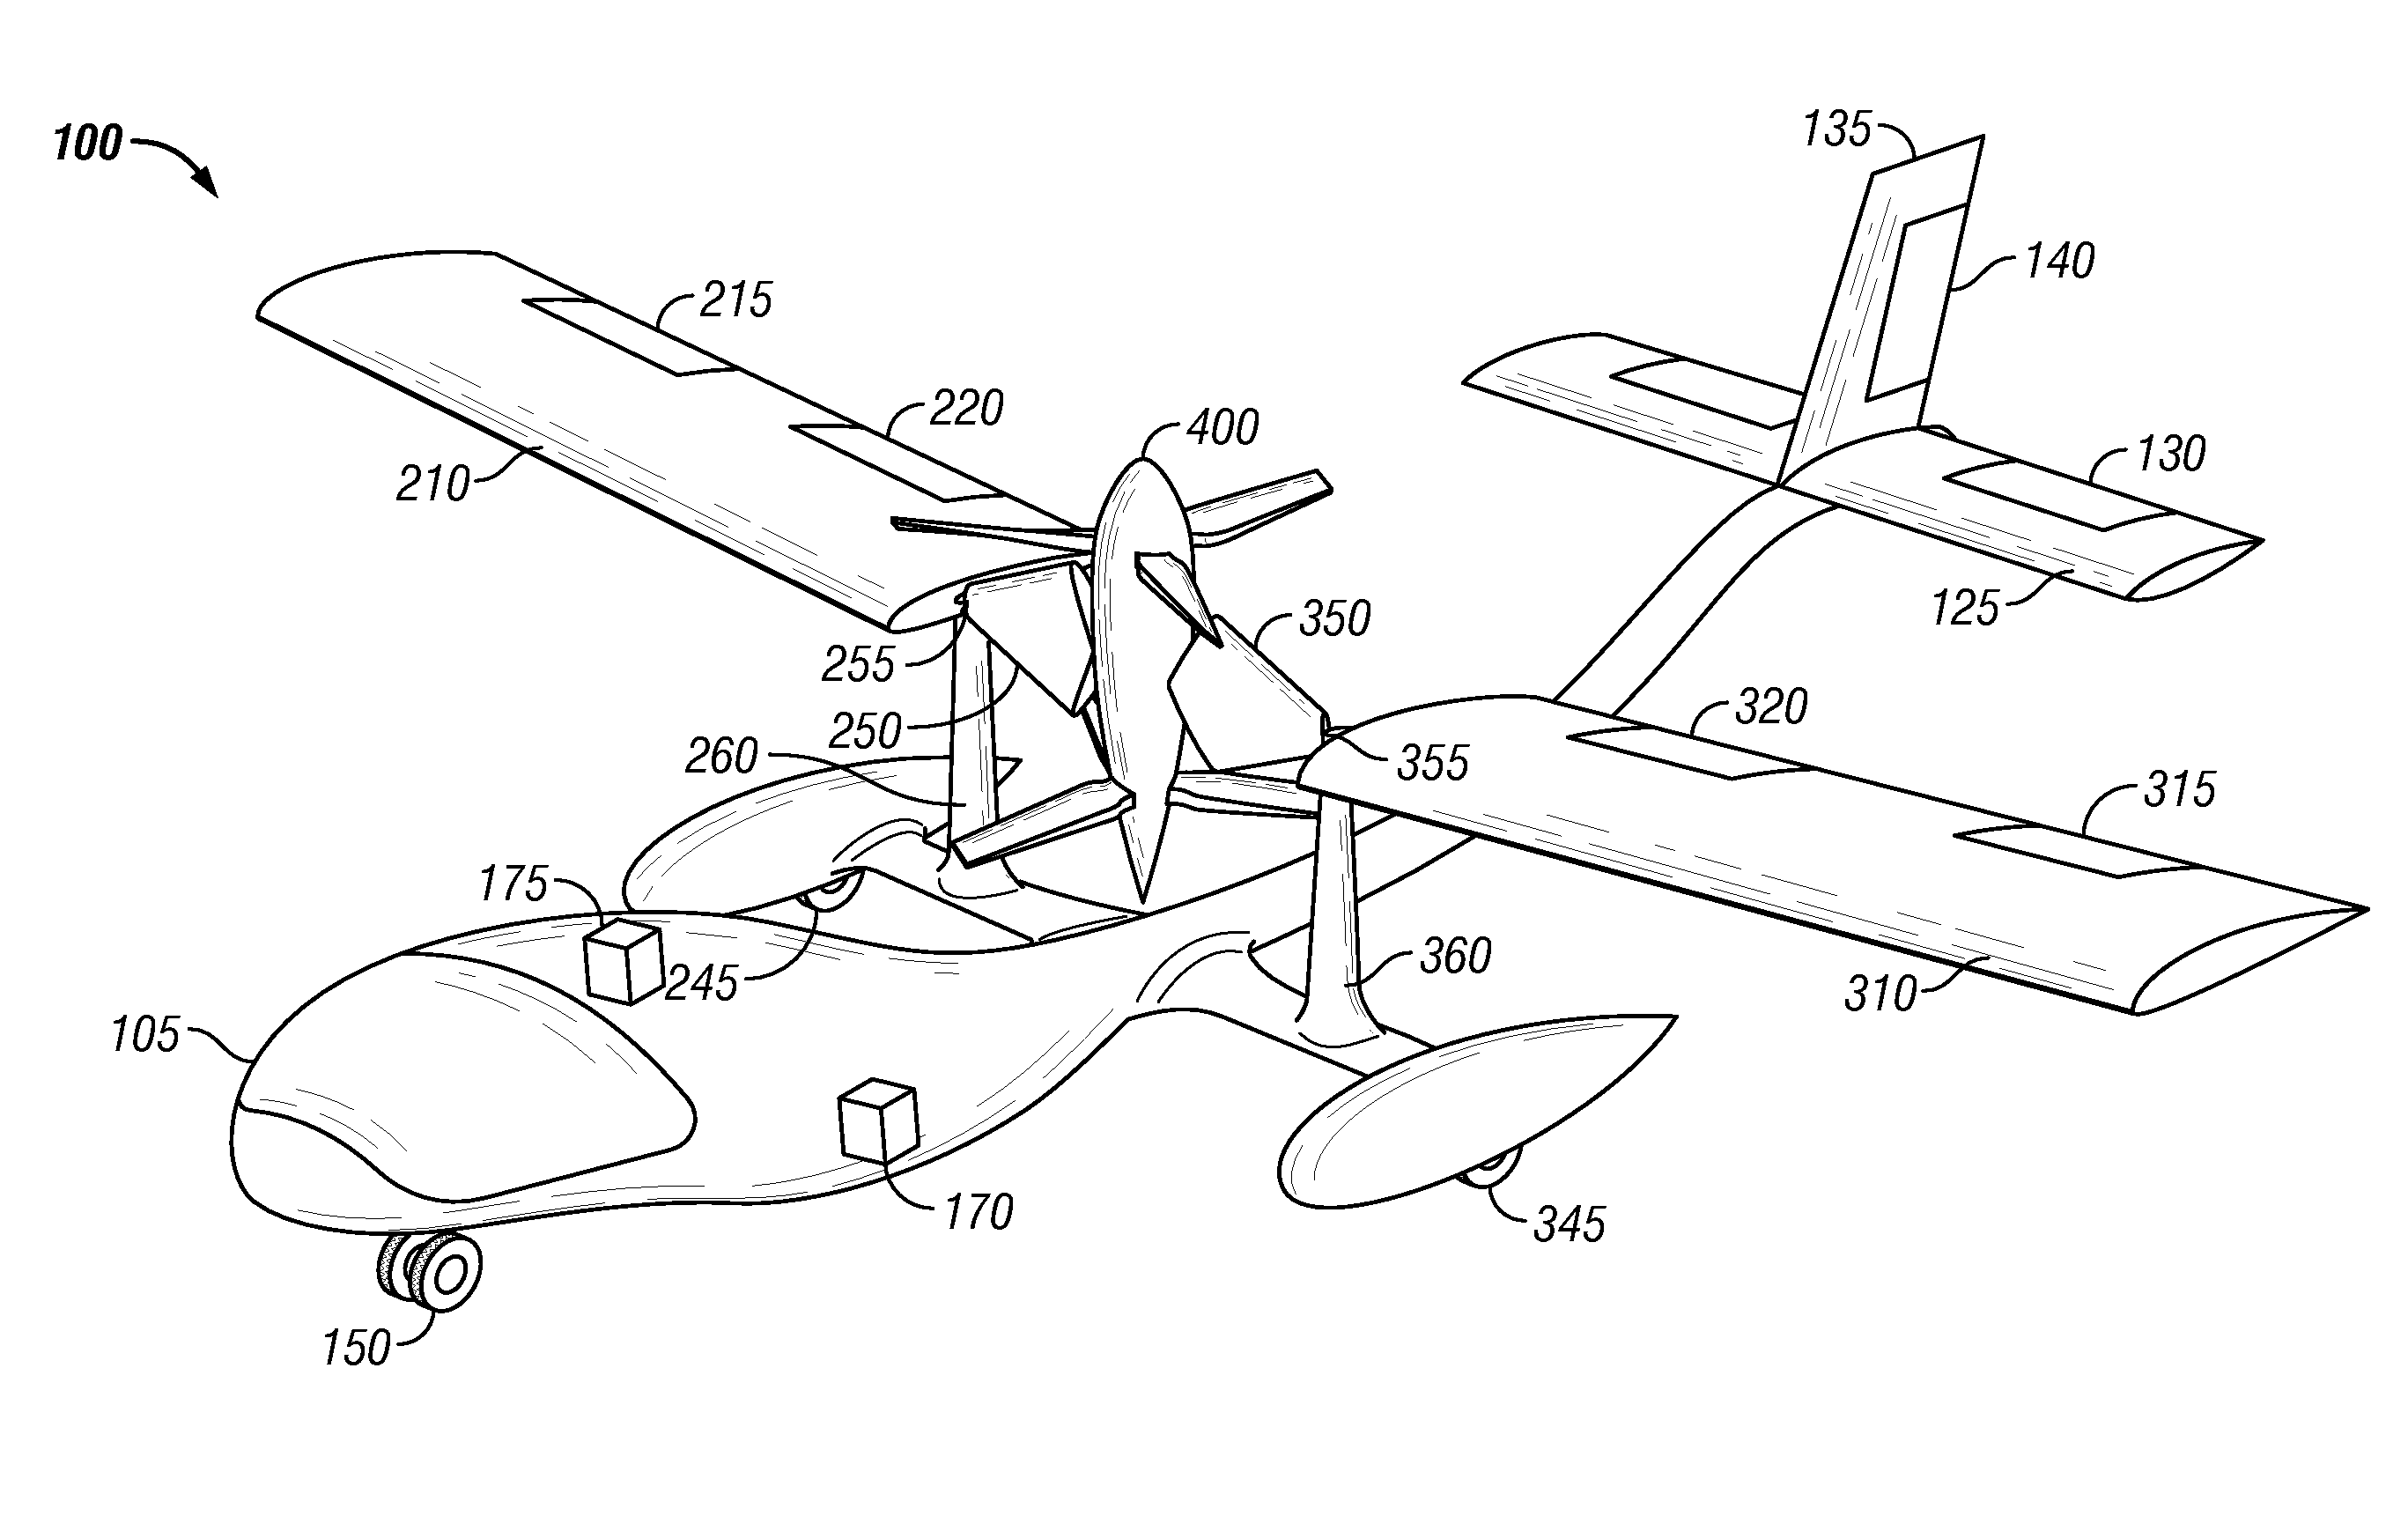 Vertical/short take-off and landing aircraft